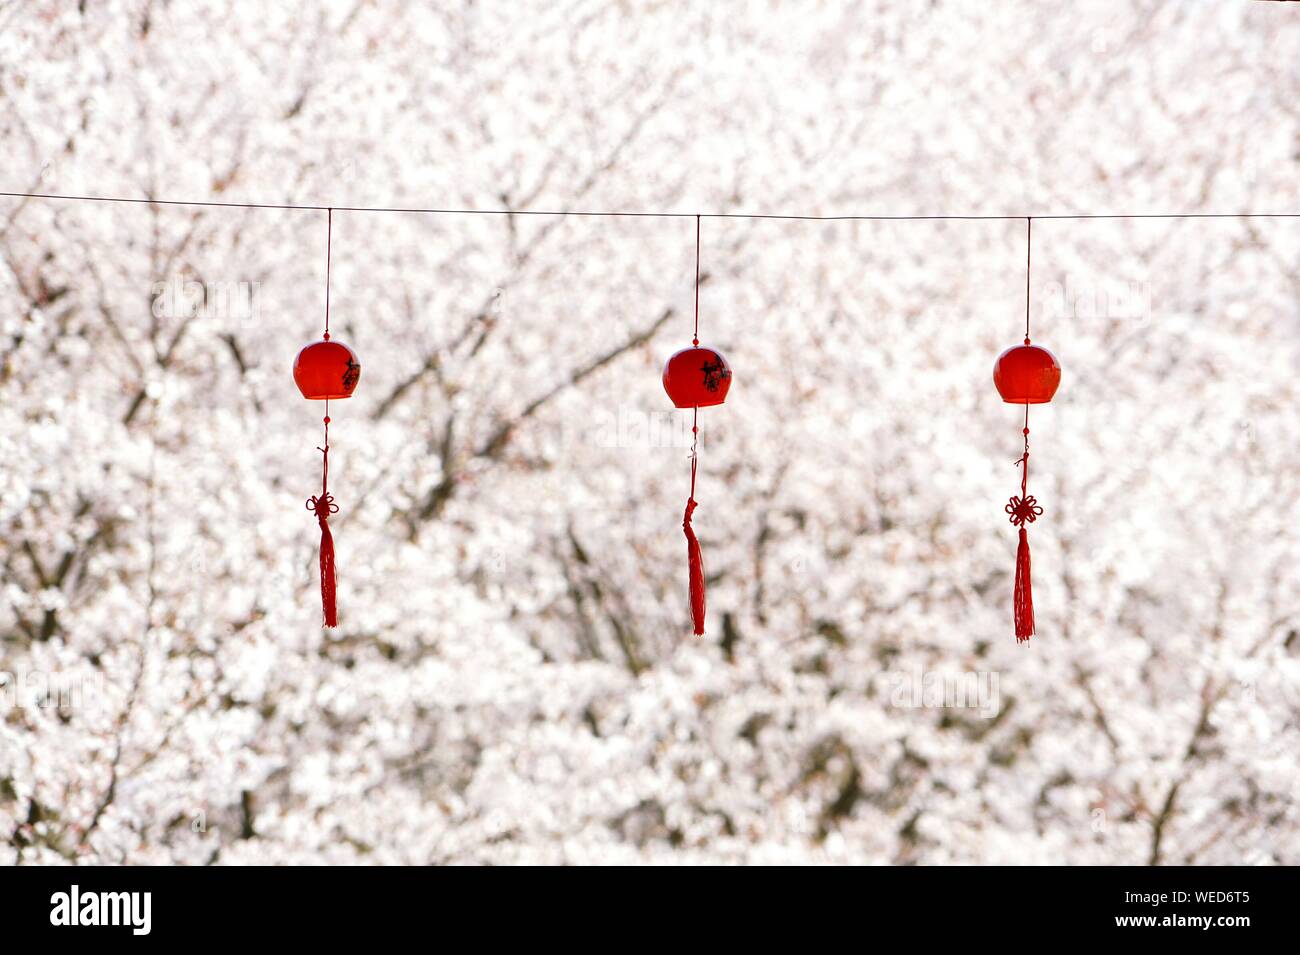 Wind Chimes Hanging On Rope Against Cherry Trees Stock Photo